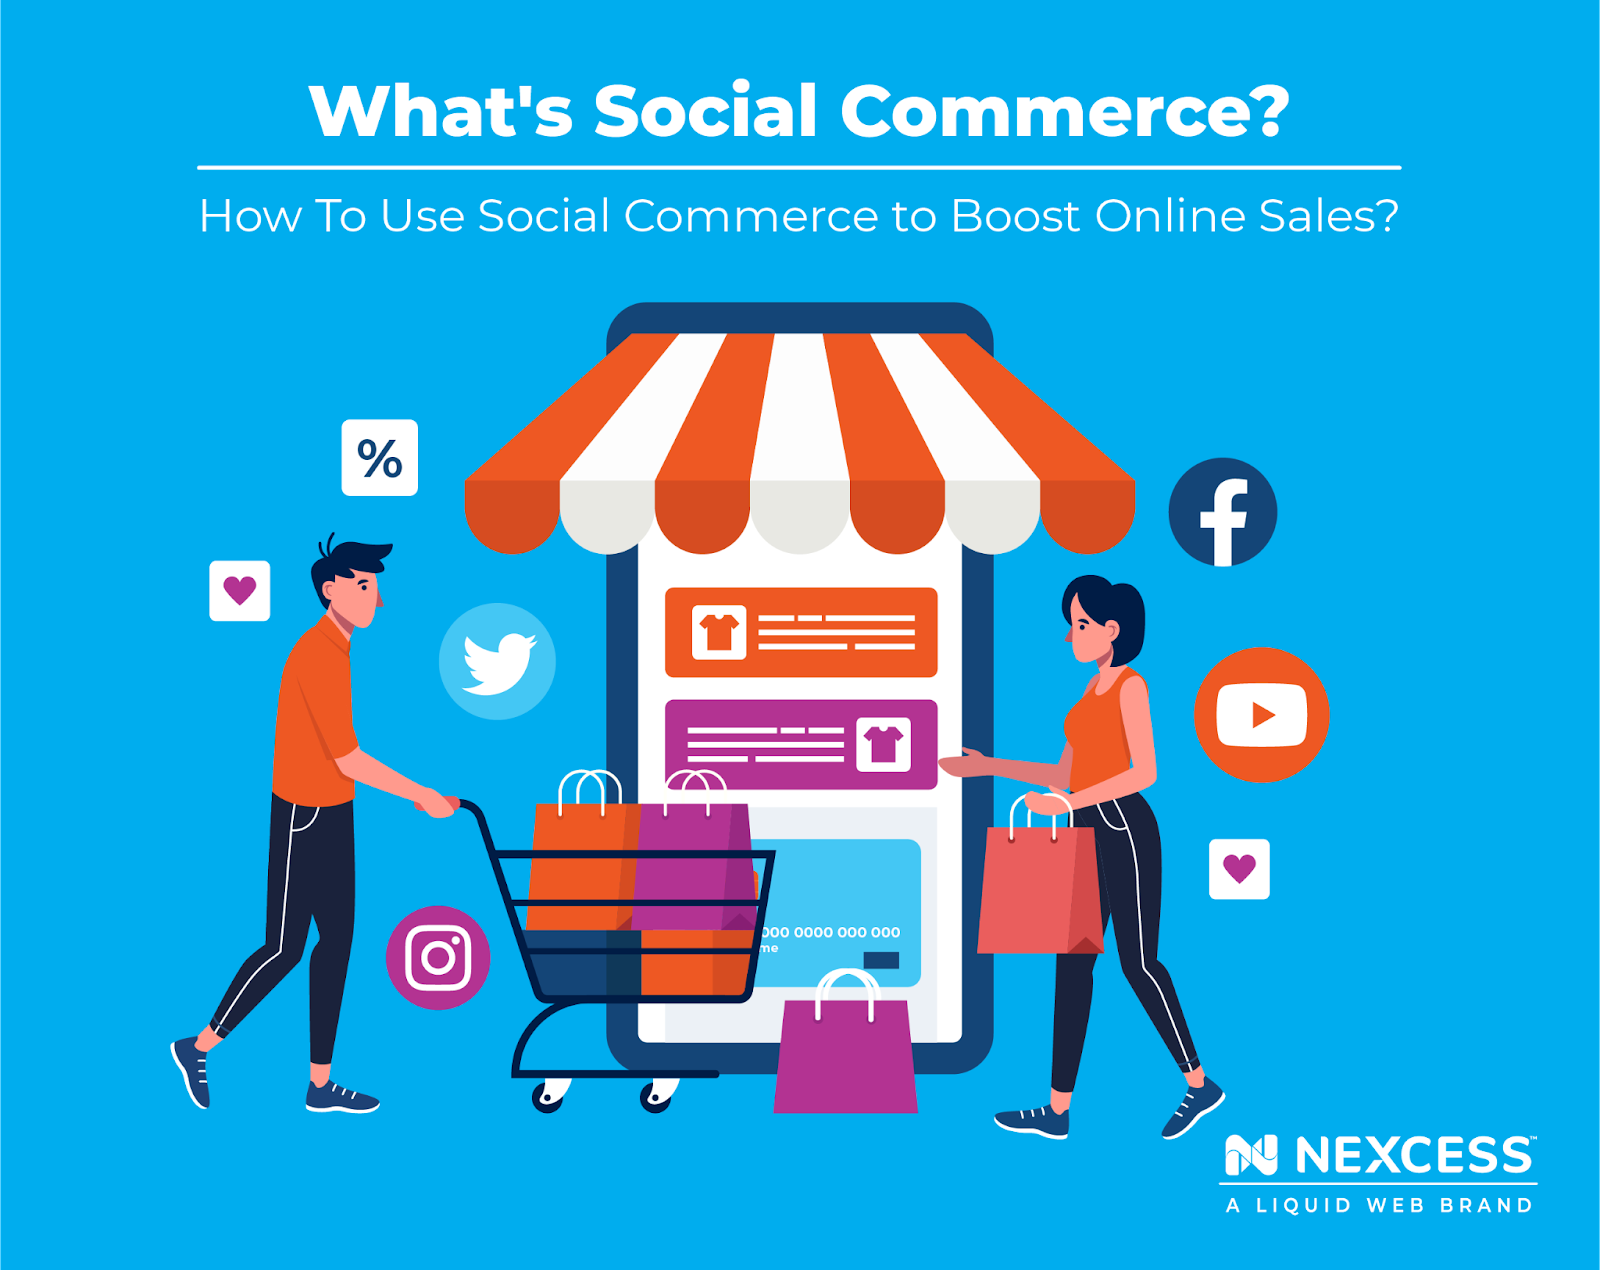  Social commerce is the process of selling products directly through social media platforms like Instagram, where customers can browse products, add them to their carts, and check out without leaving the app.